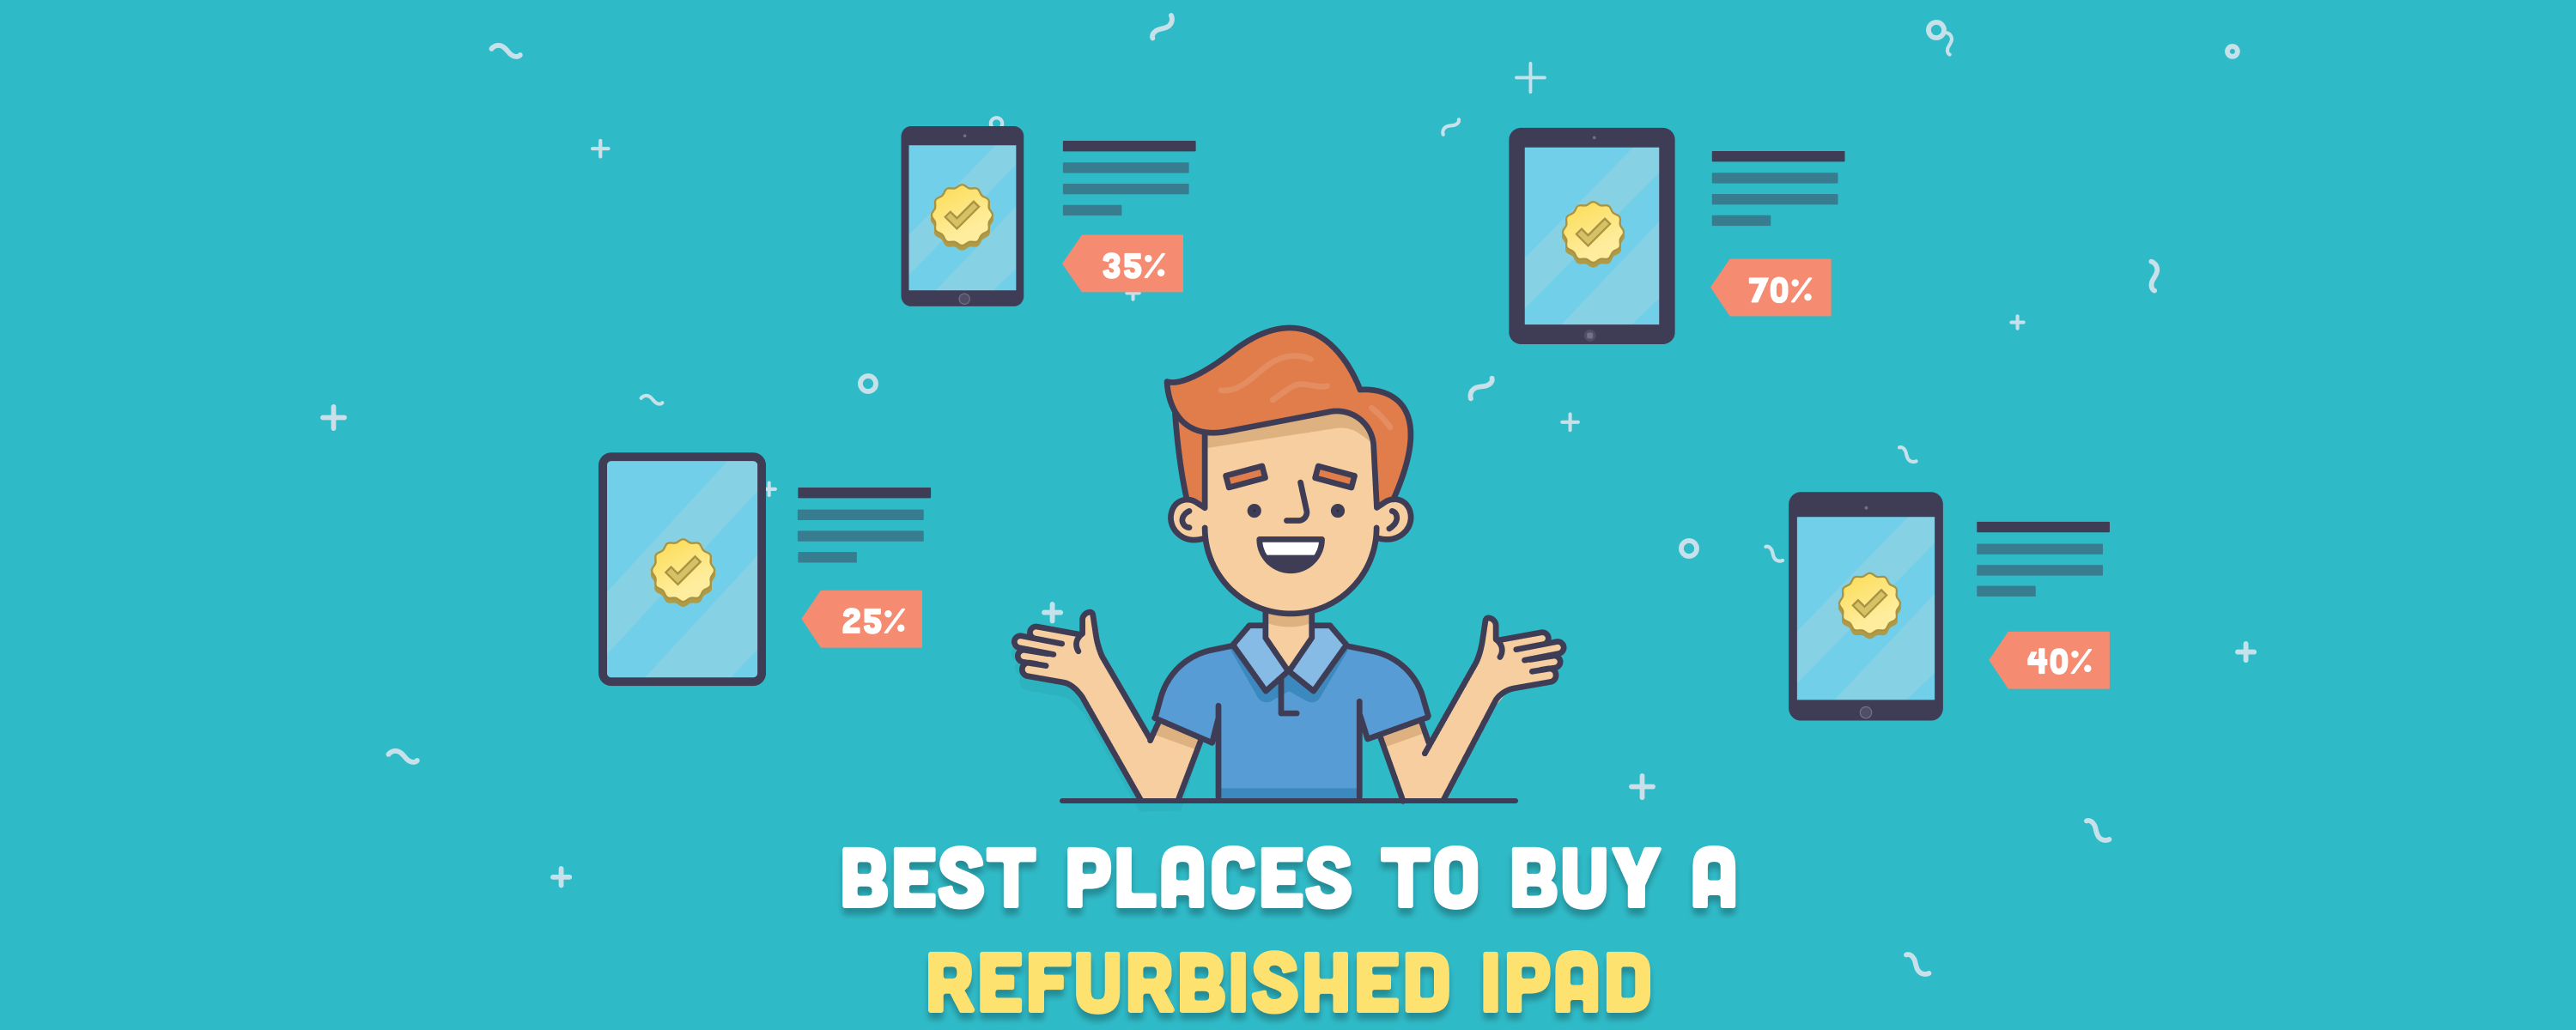 5 Best Places to Buy a Refurbished iPad